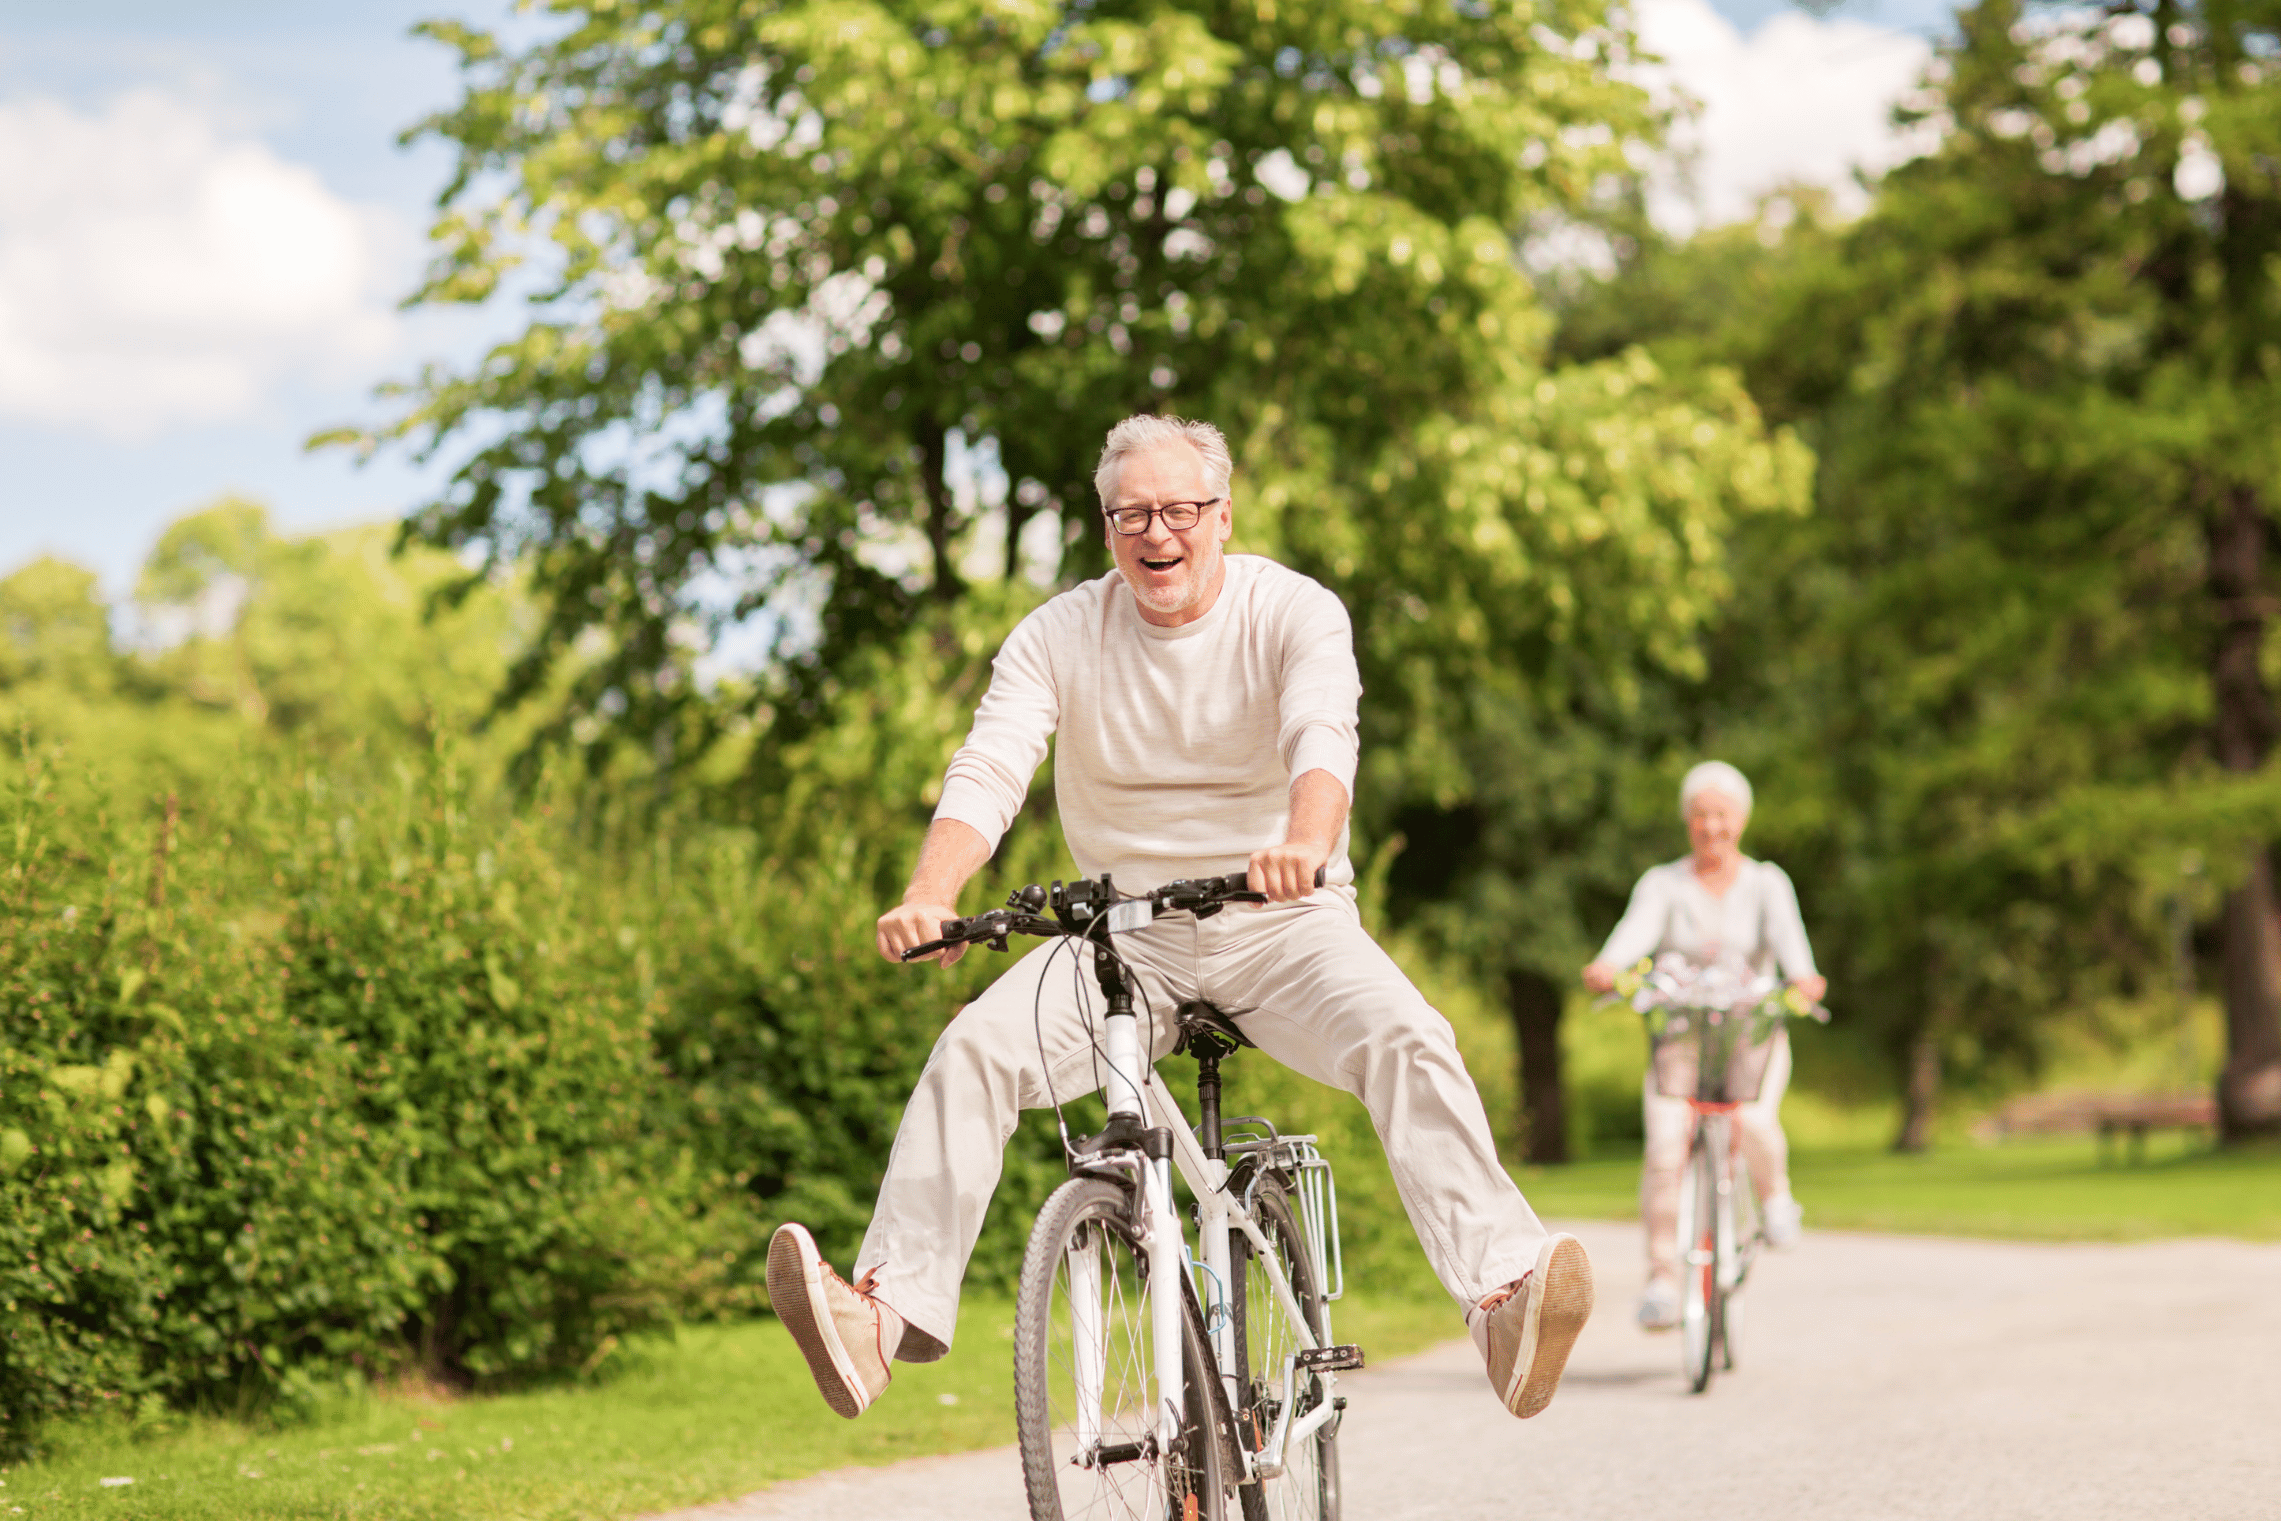 An image of an older couple bike riding together.